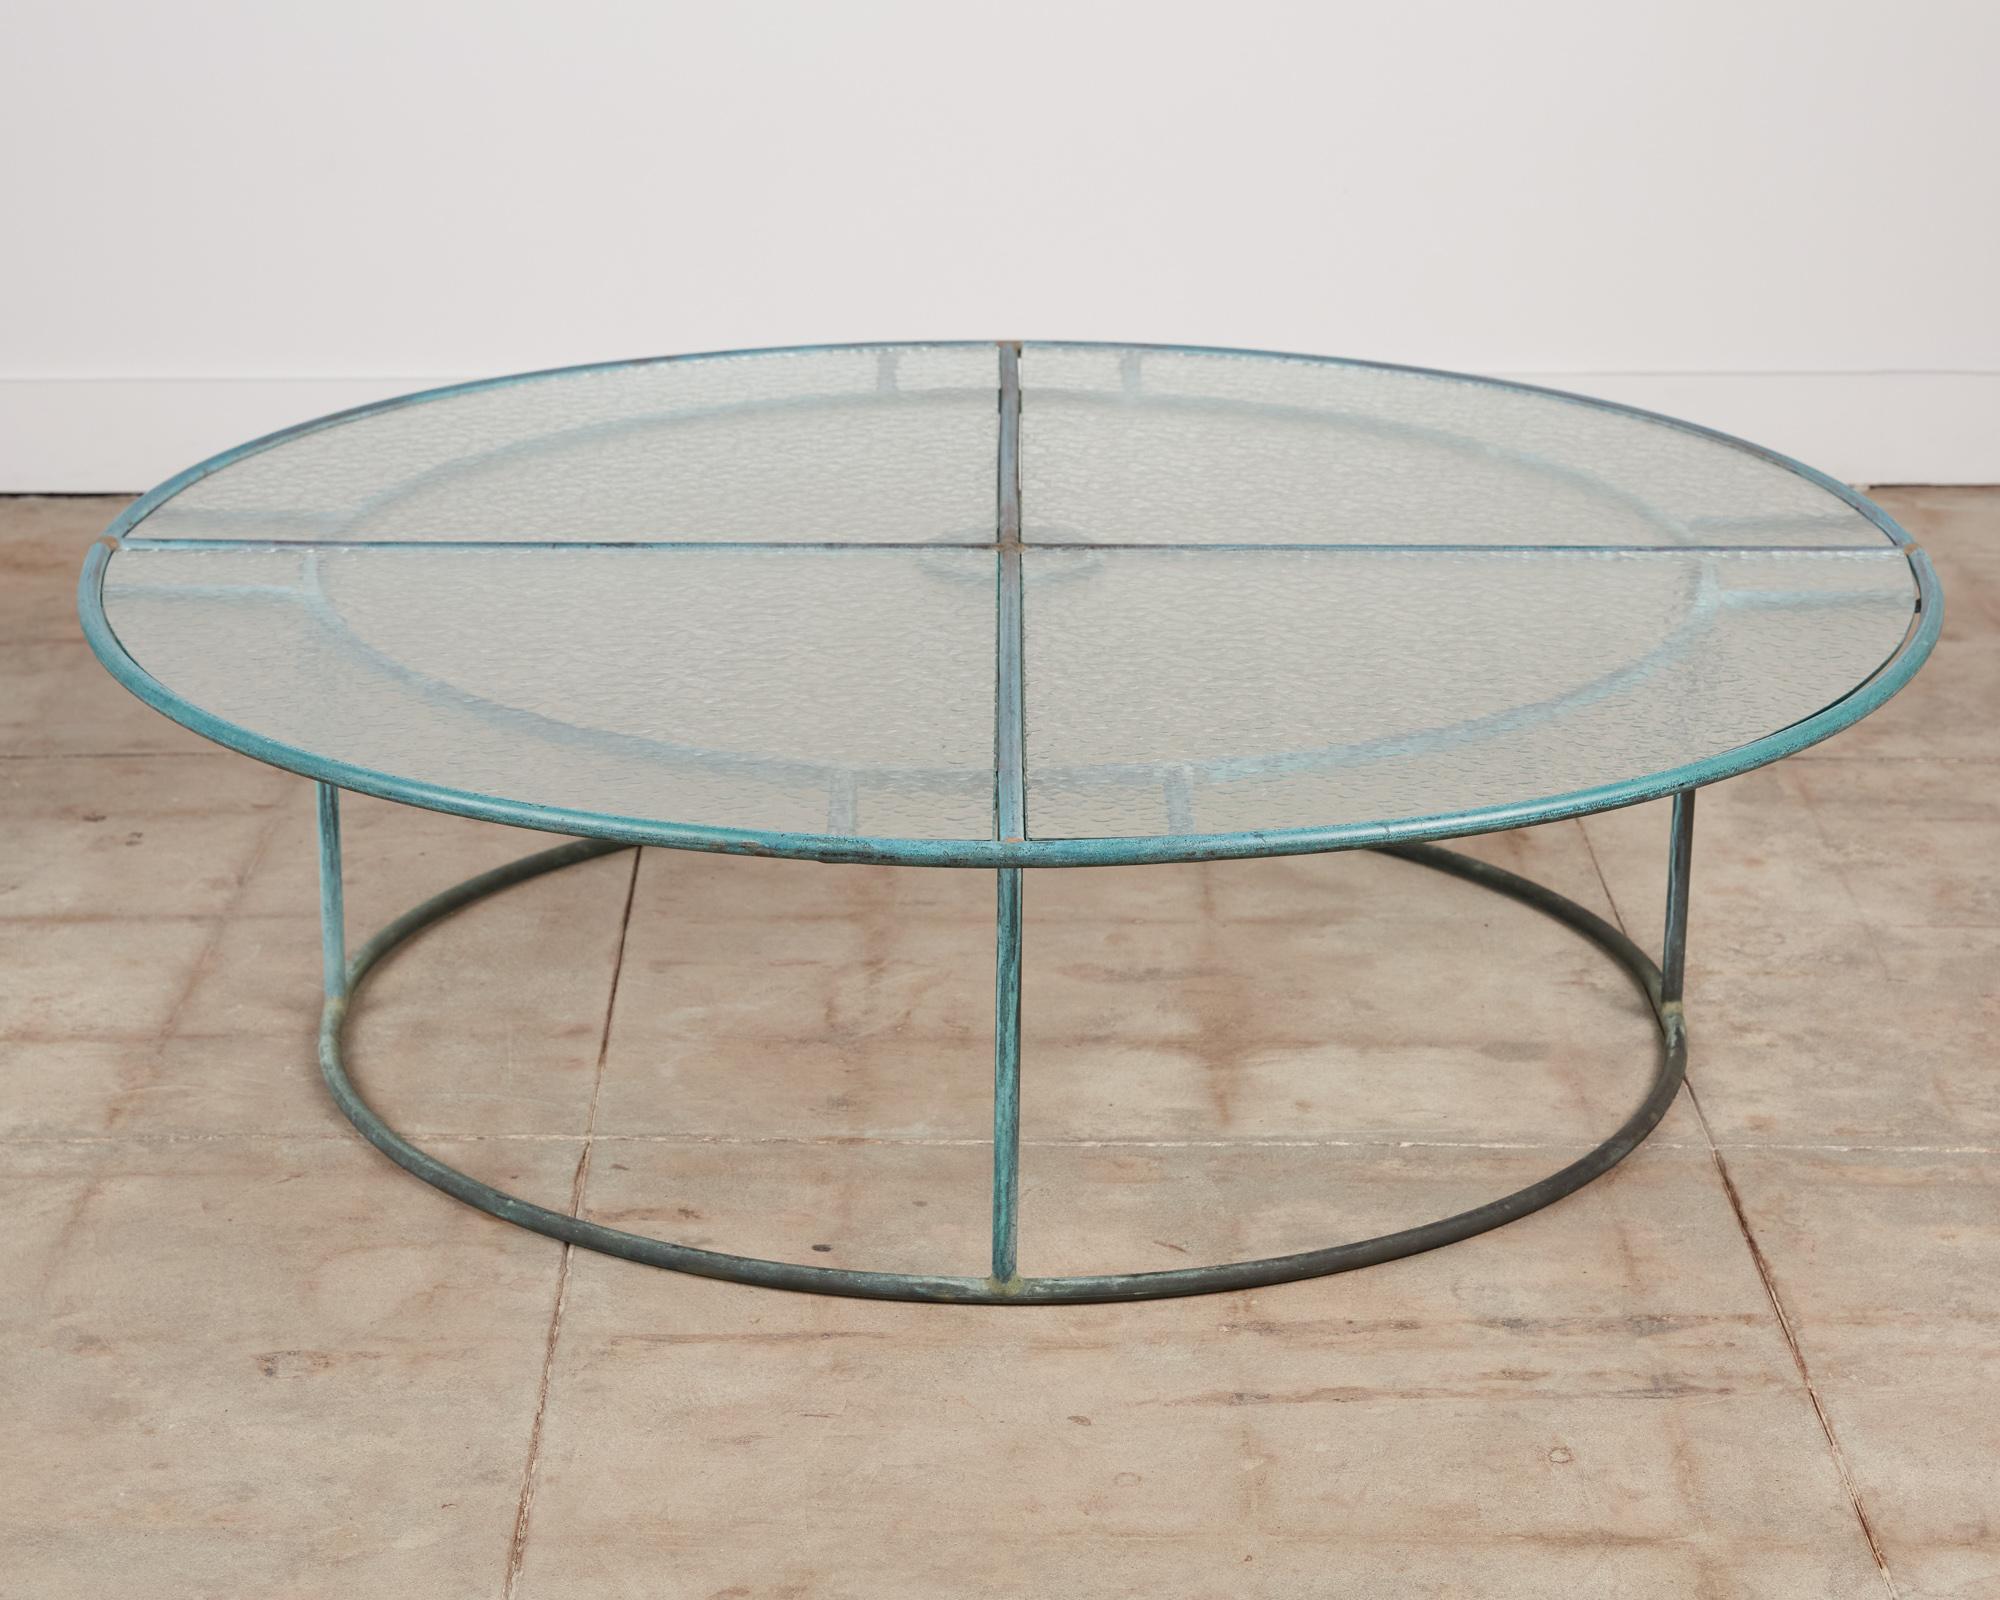 A patio coffee table in patinated bronze designed by Walter Lamb and produced by Brown Jordan. The monumental frame is described by a concentric ring of bronze with radial supports and a circular bronze base.  The round tabletop is made up of 4